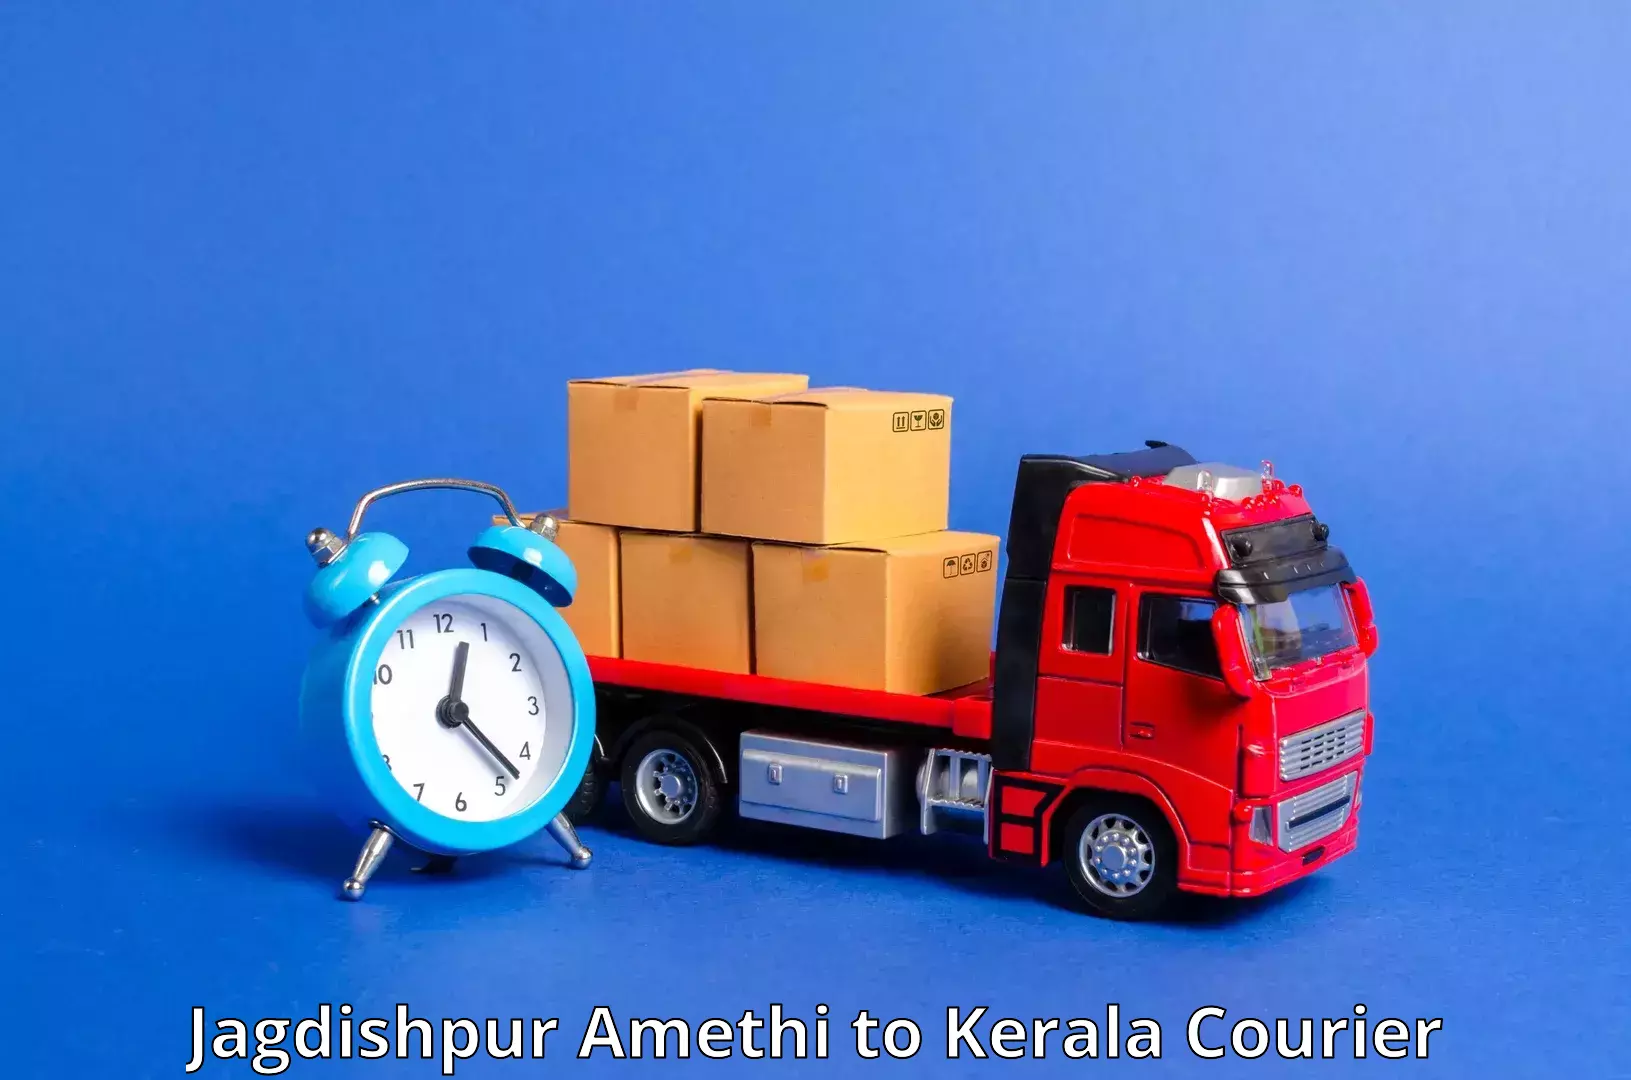 Cash on delivery service Jagdishpur Amethi to Thalassery